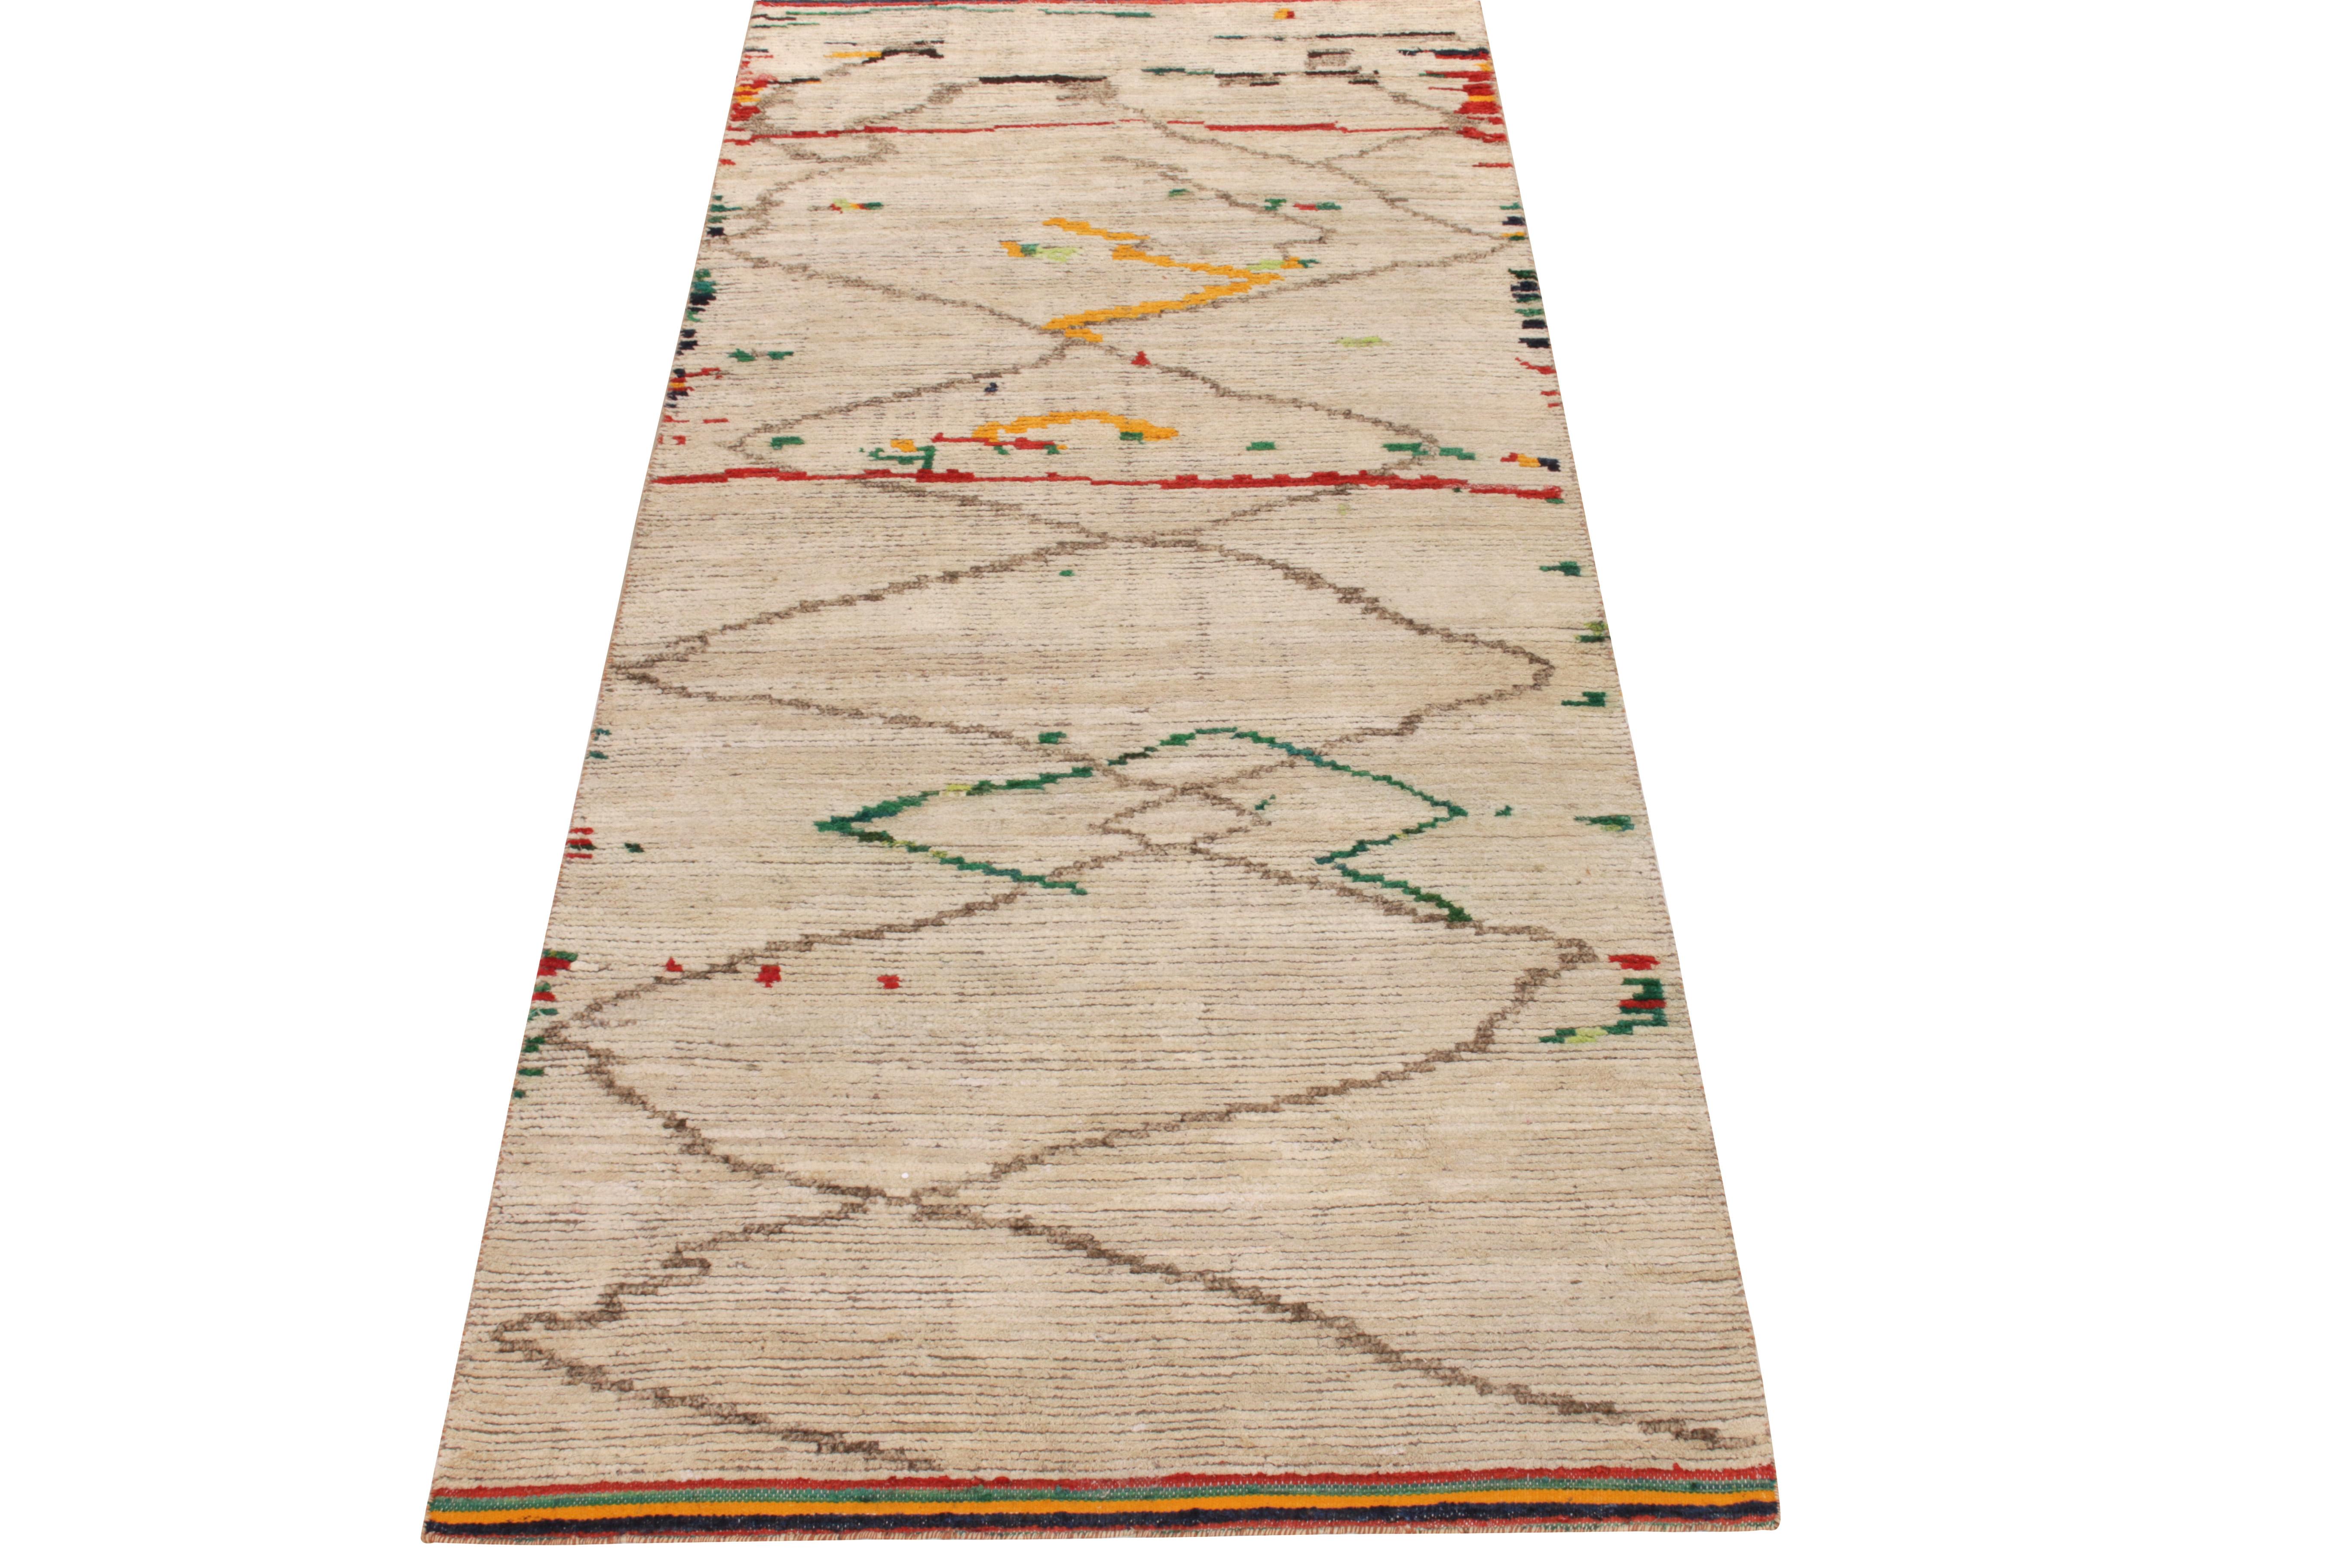 Rug & Kilim’s original ode to Moroccan rug design, carrying a luscious healthy pile in creamy beige comfortably mothering a defined geometric pattern in muted brown tones. The tribal aesthetics of this style enjoy a joyful play of crimson red,